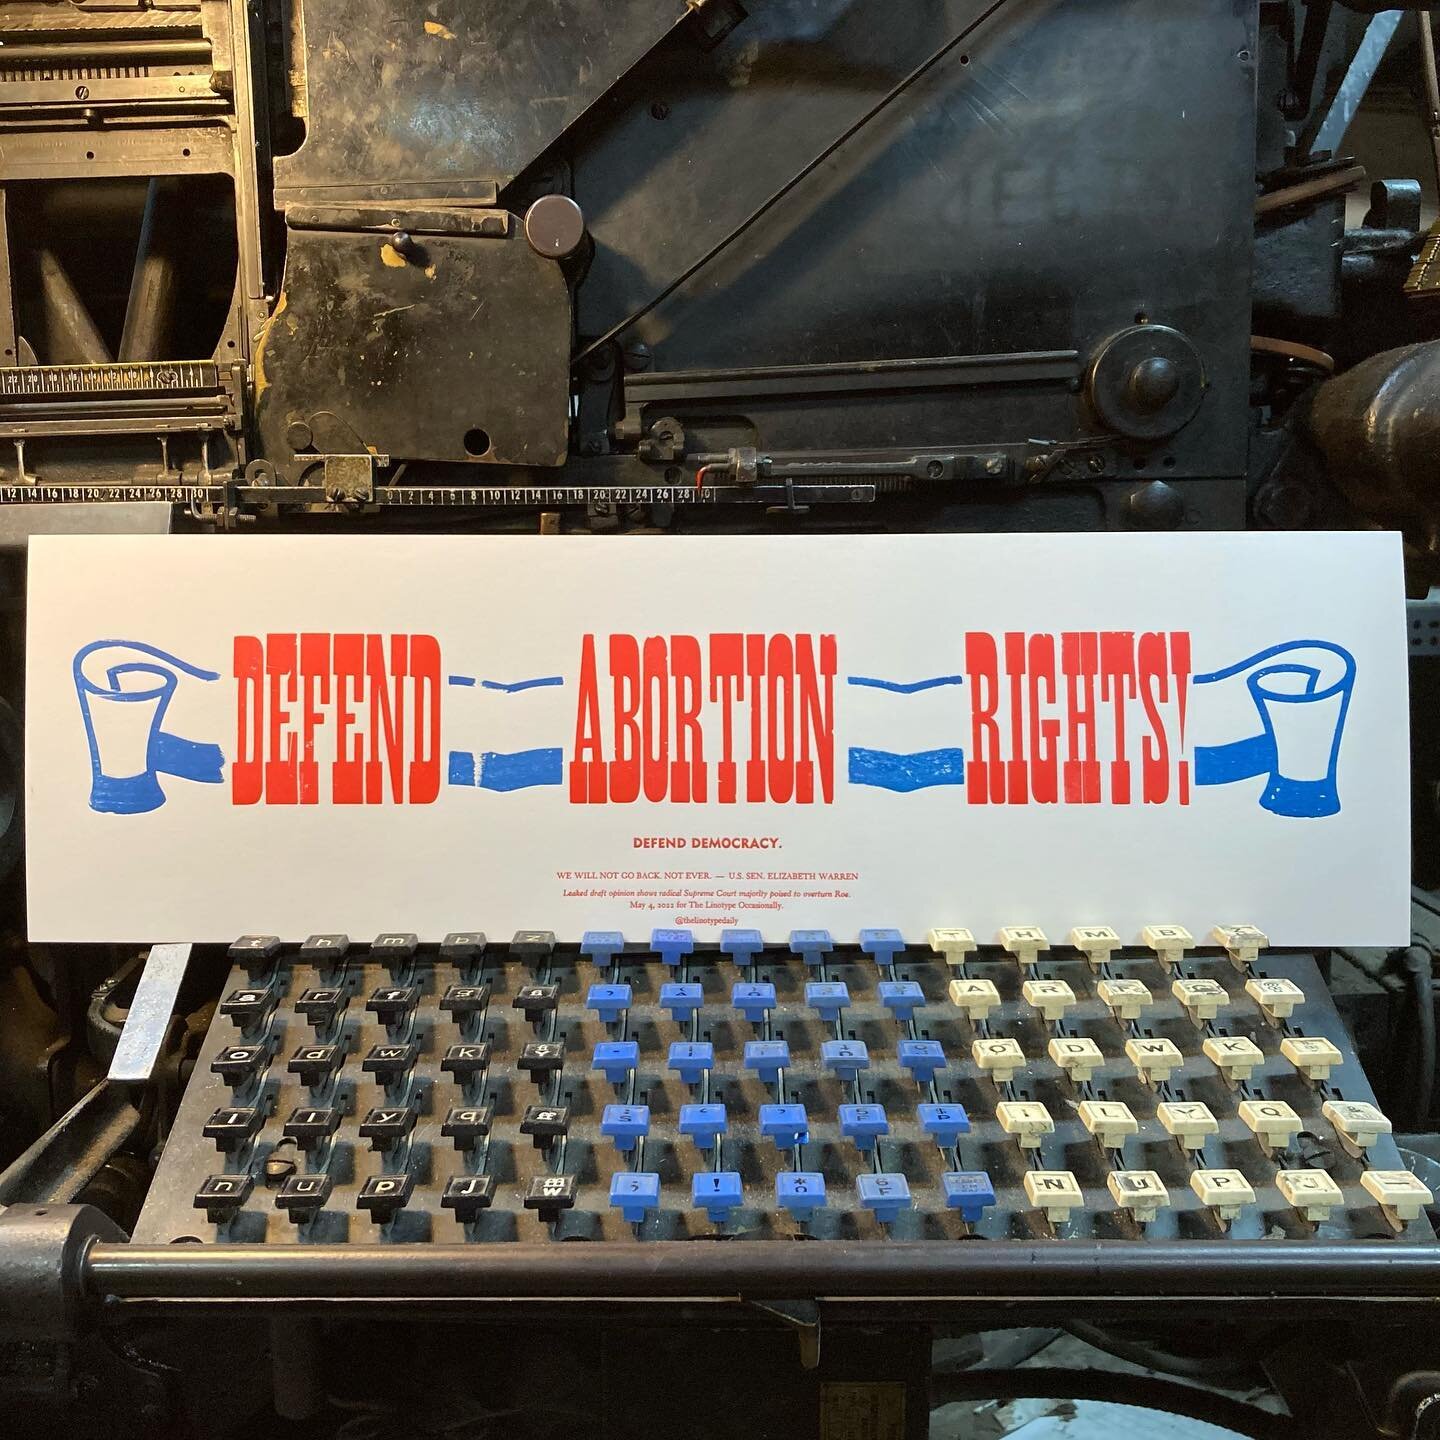 &quot;How dare they? How dare they tell a woman what she can do and not do with her own body? How dare they? How dare they try to stop her from determining her own future?&quot; - VP Kamala Harris speaking last night. #letterpress #linotype #woodtype